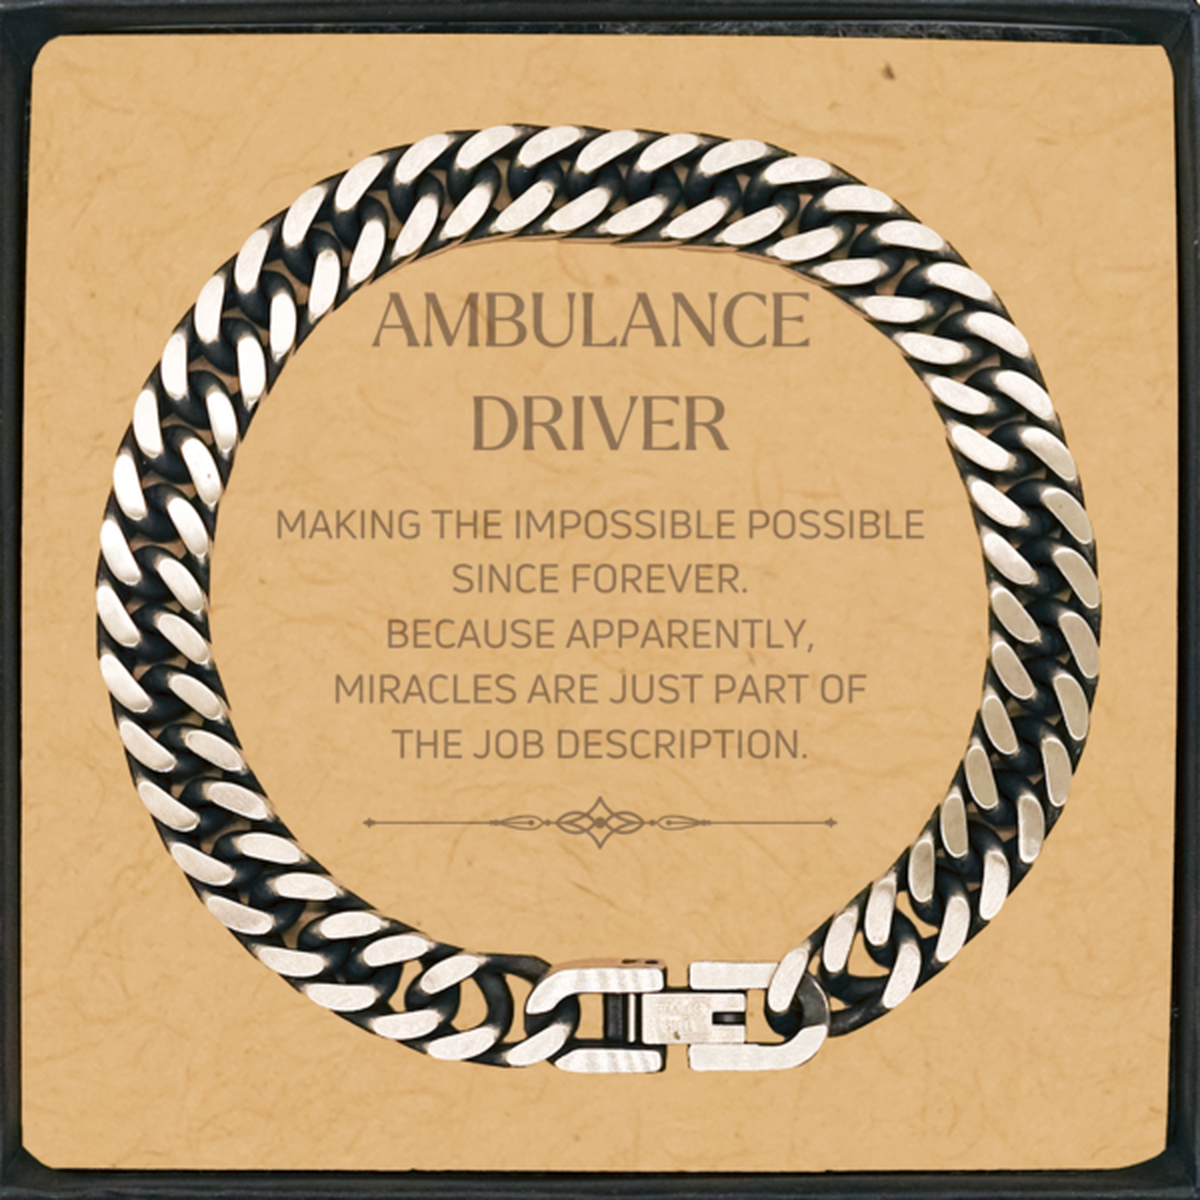 Funny Ambulance Driver Gifts, Miracles are just part of the job description, Inspirational Birthday Cuban Link Chain Bracelet For Ambulance Driver, Men, Women, Coworkers, Friends, Boss